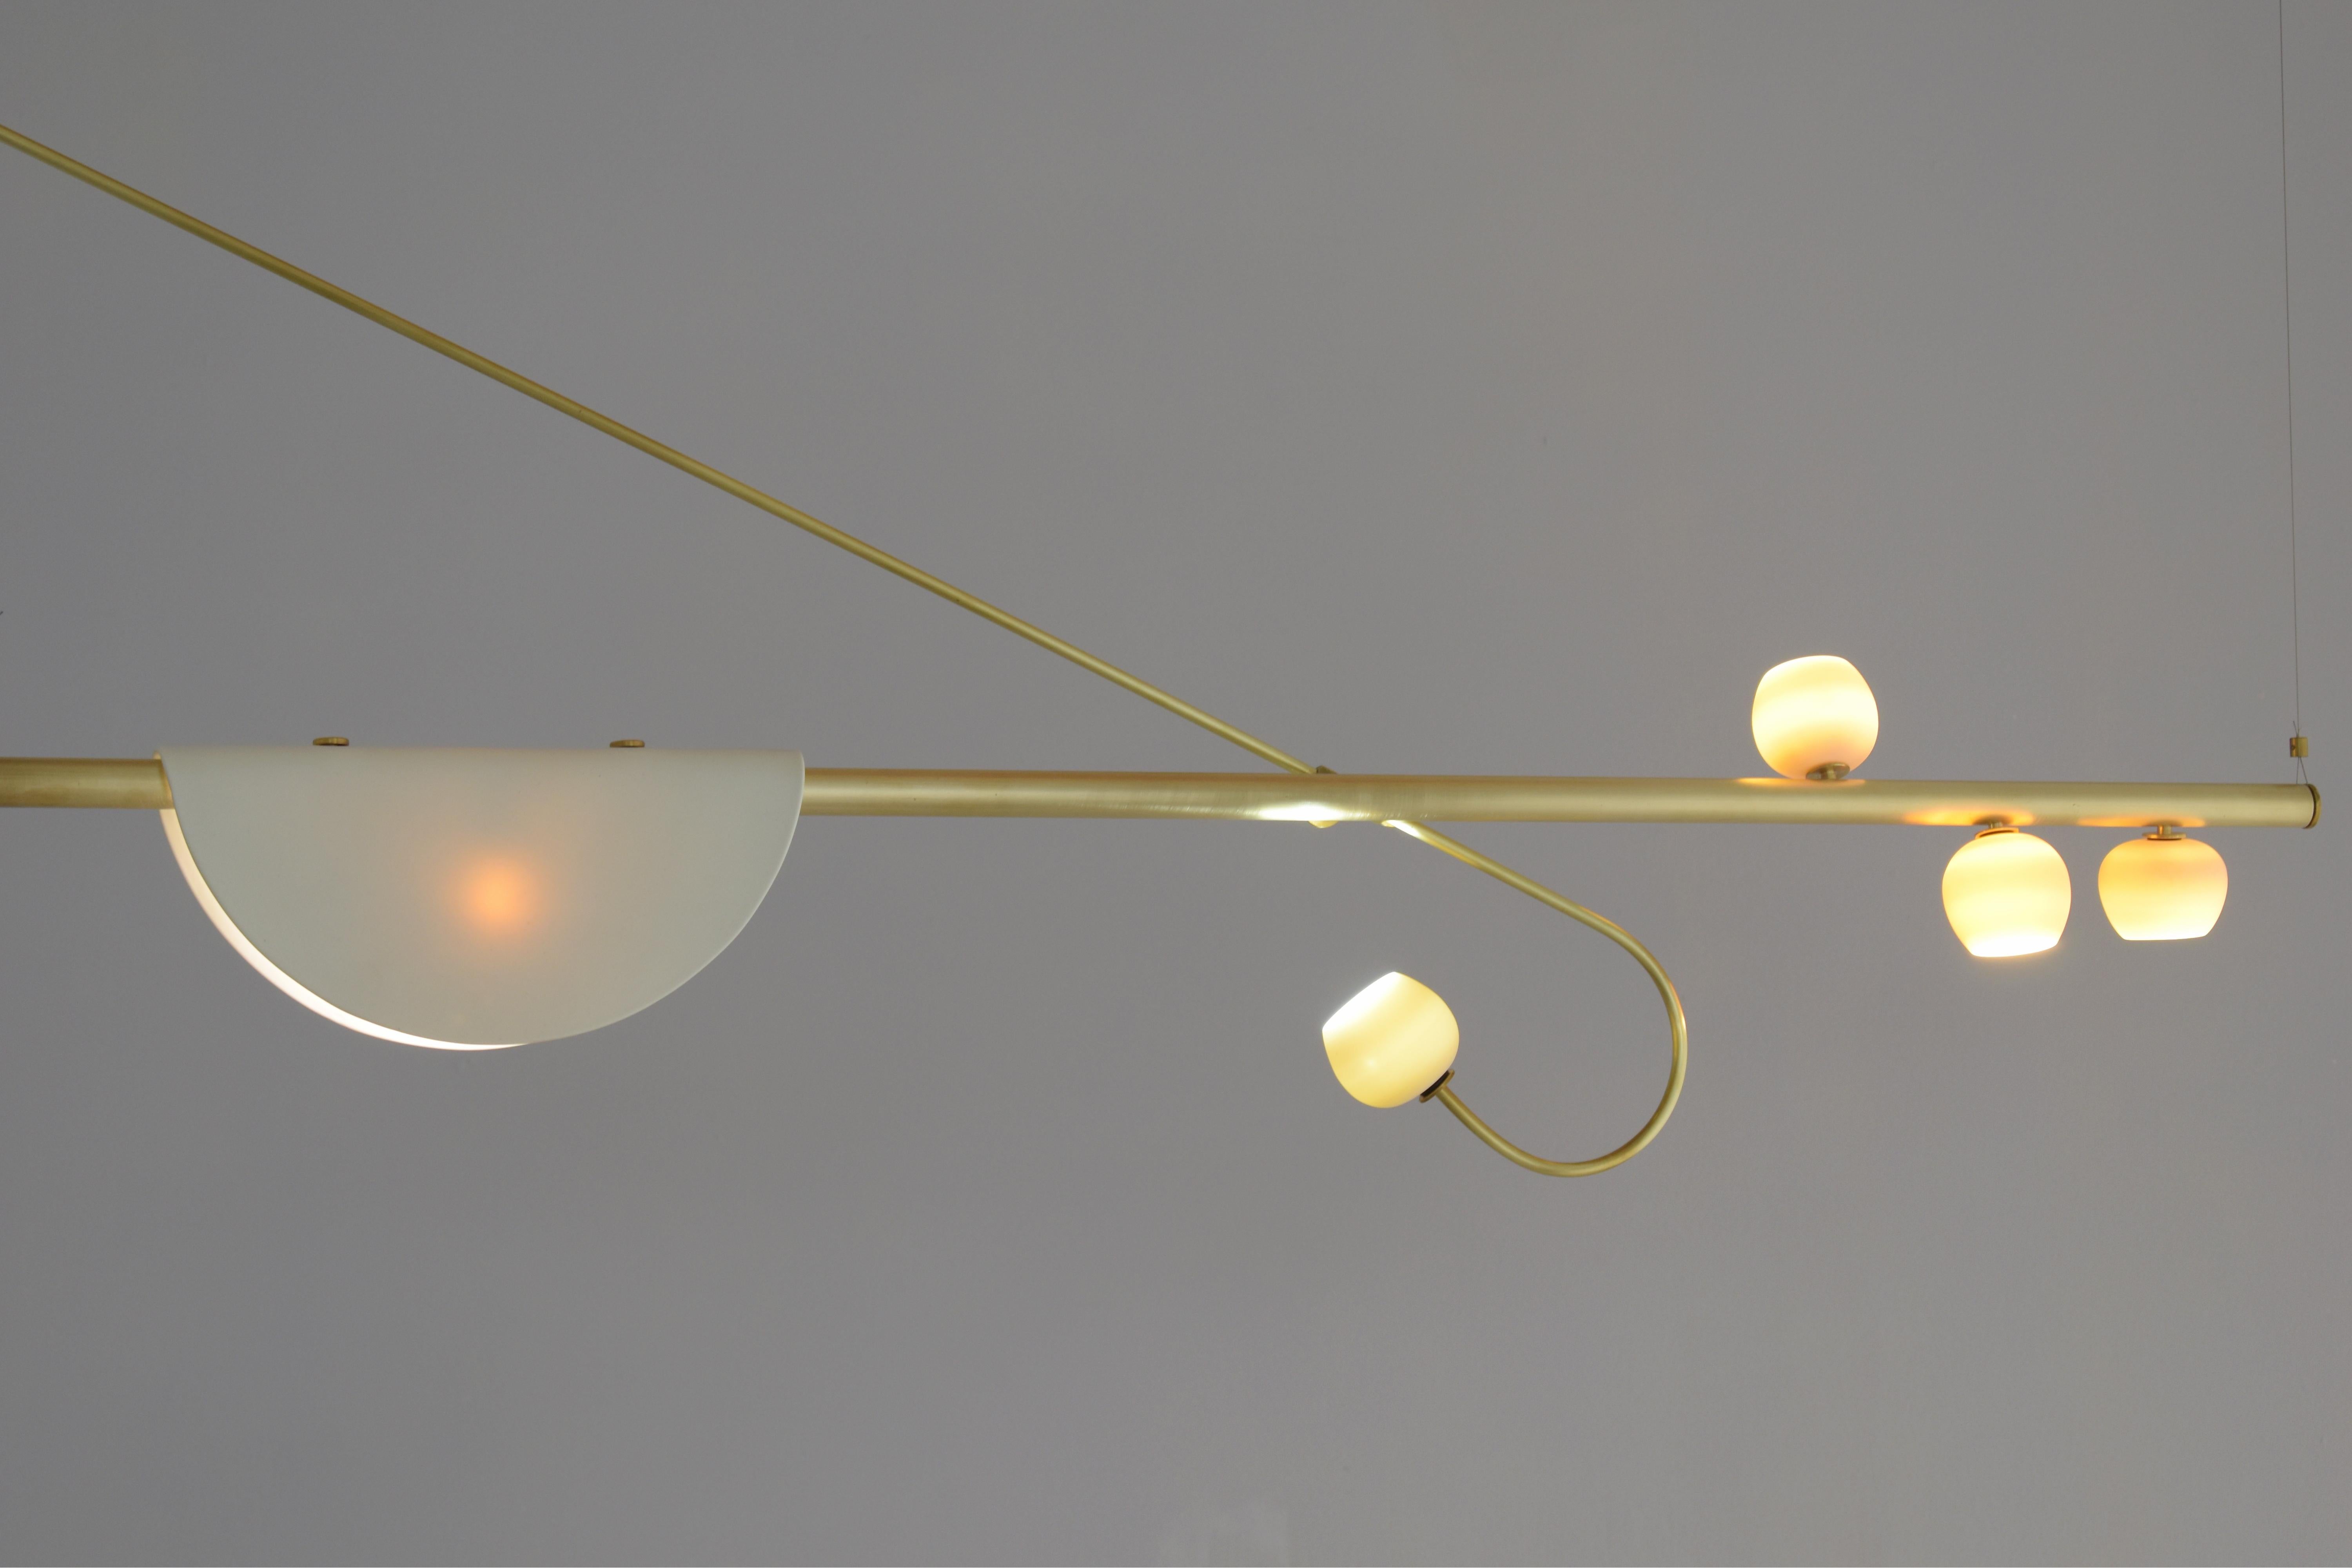 Modern Brass Sculpted Light Suspension, My Queen IV, Signed Periclis Frementitis